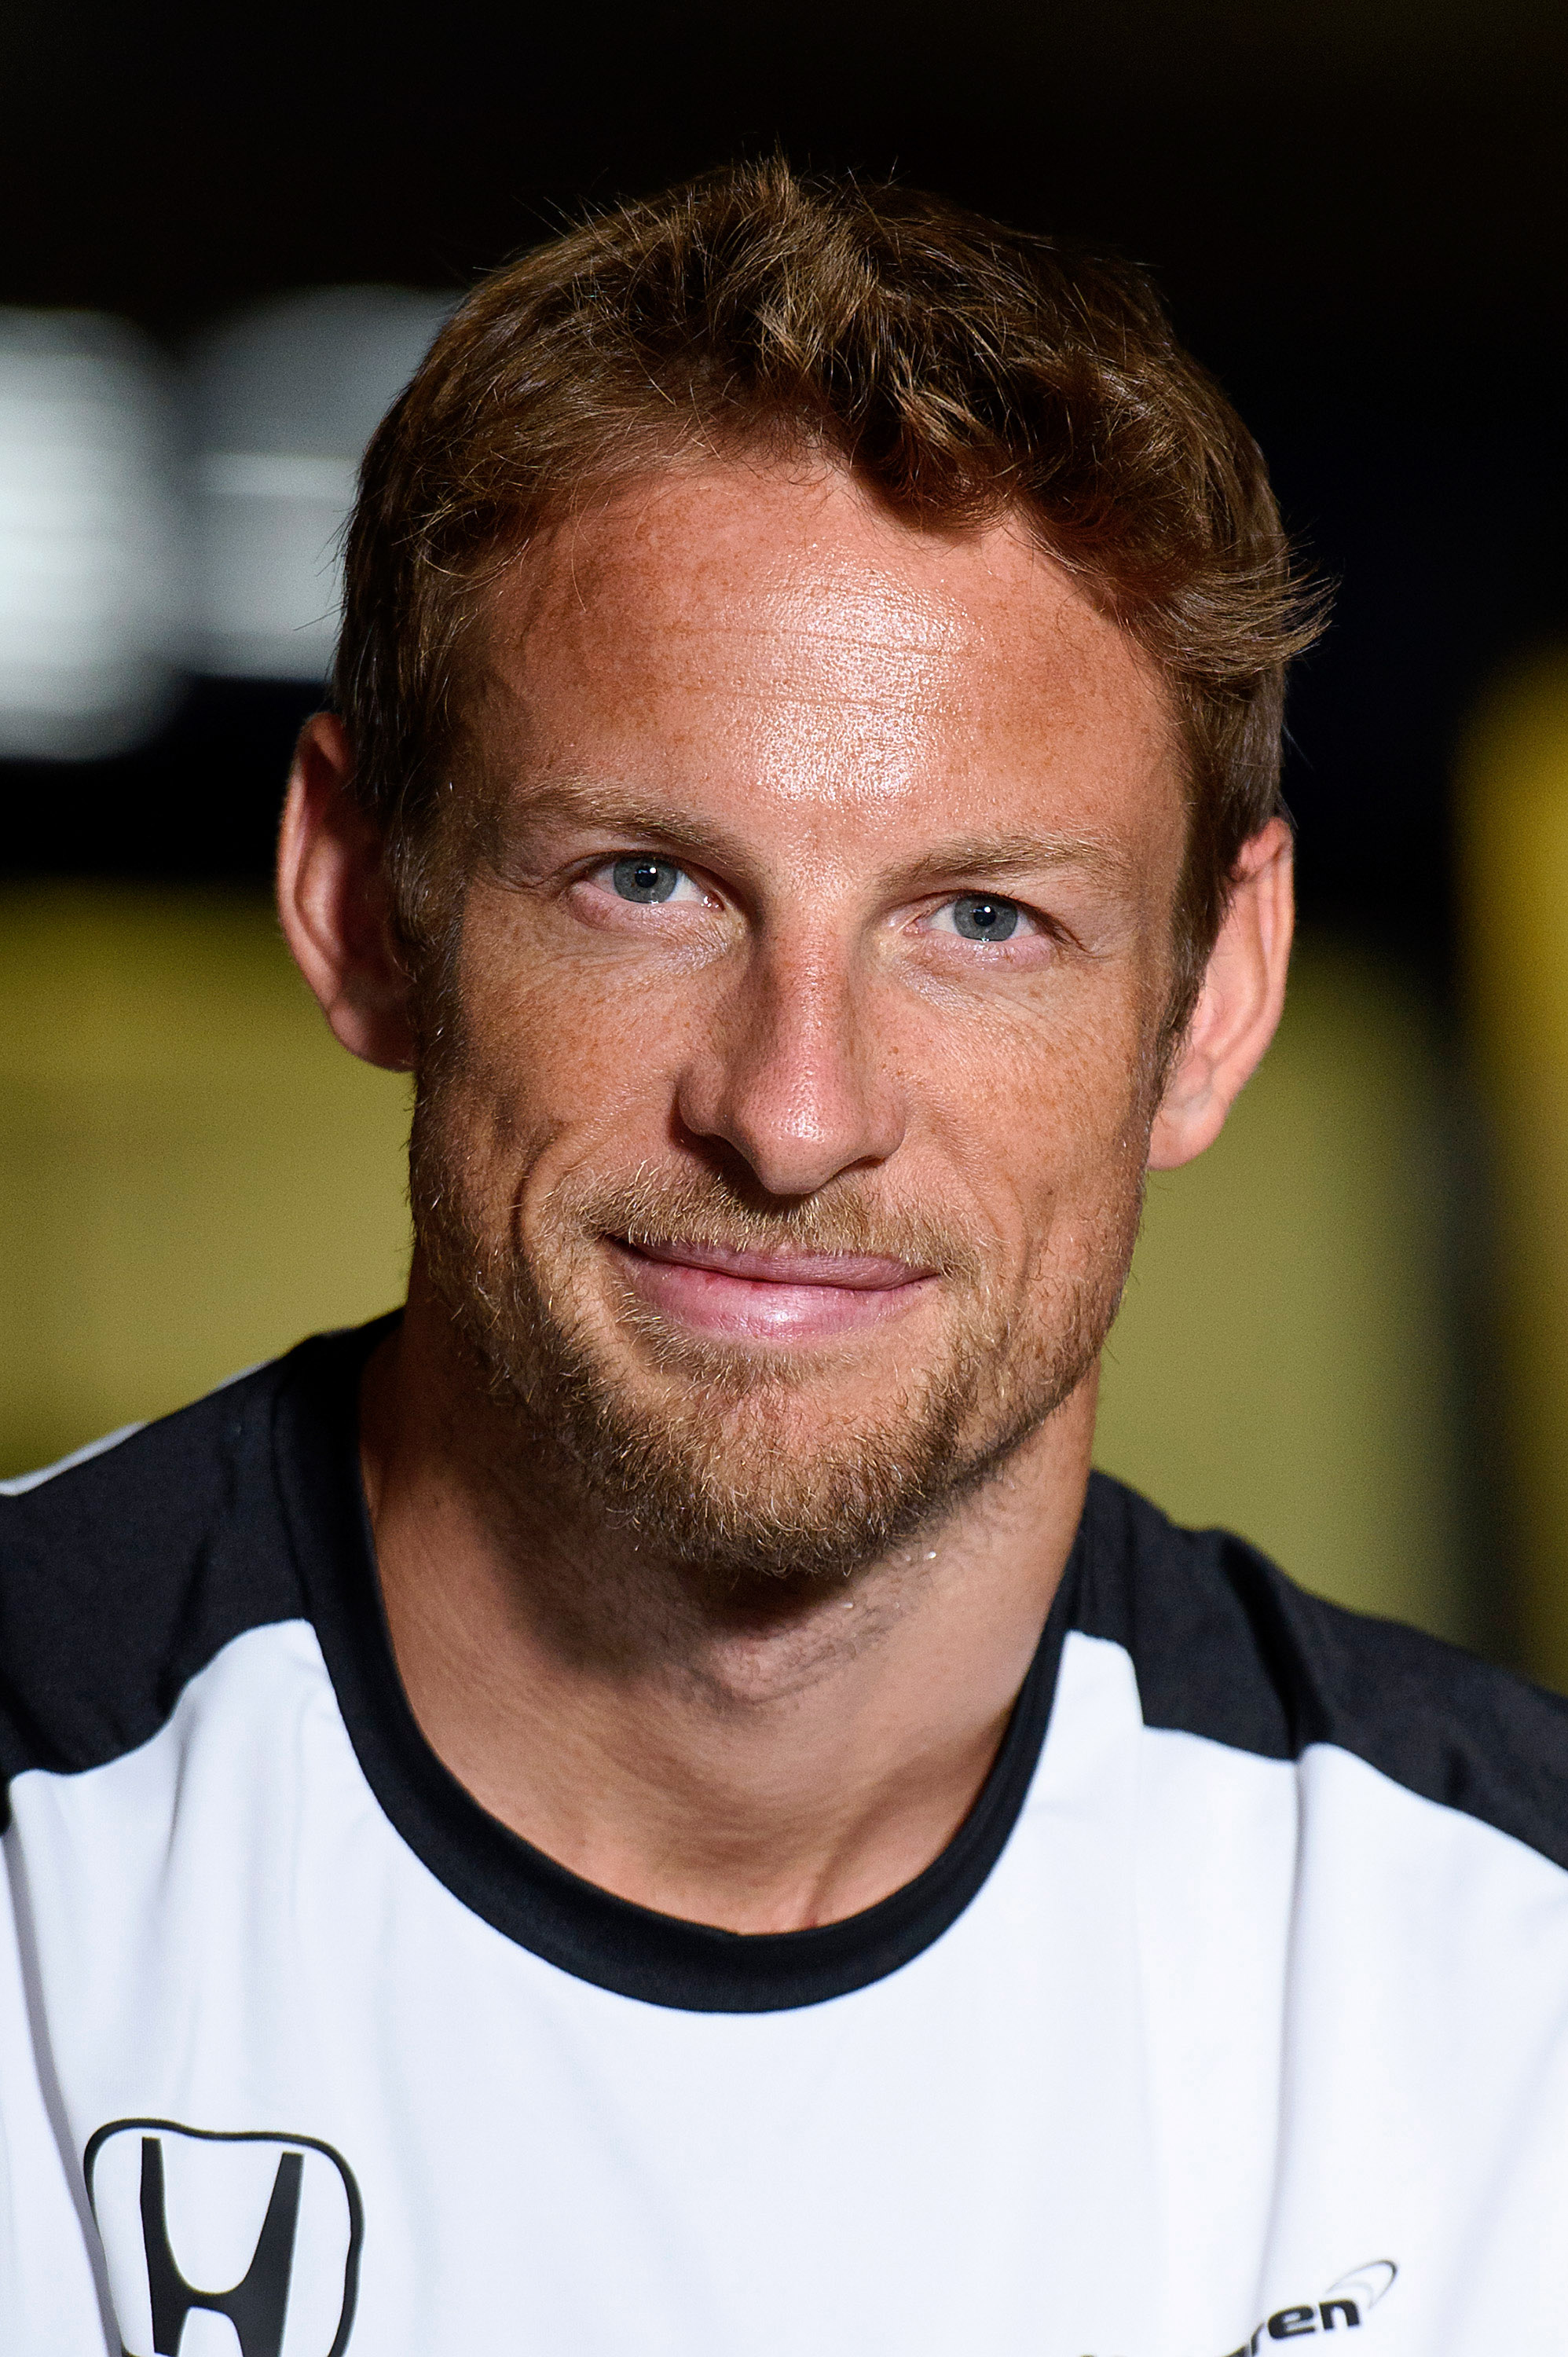 Jenson Button attends a photocall to launch Santander Cycle tours at the Science Museum on June 30, 2015 in London, England. (Ben A. Pruchnie&mdash;Getty Images)